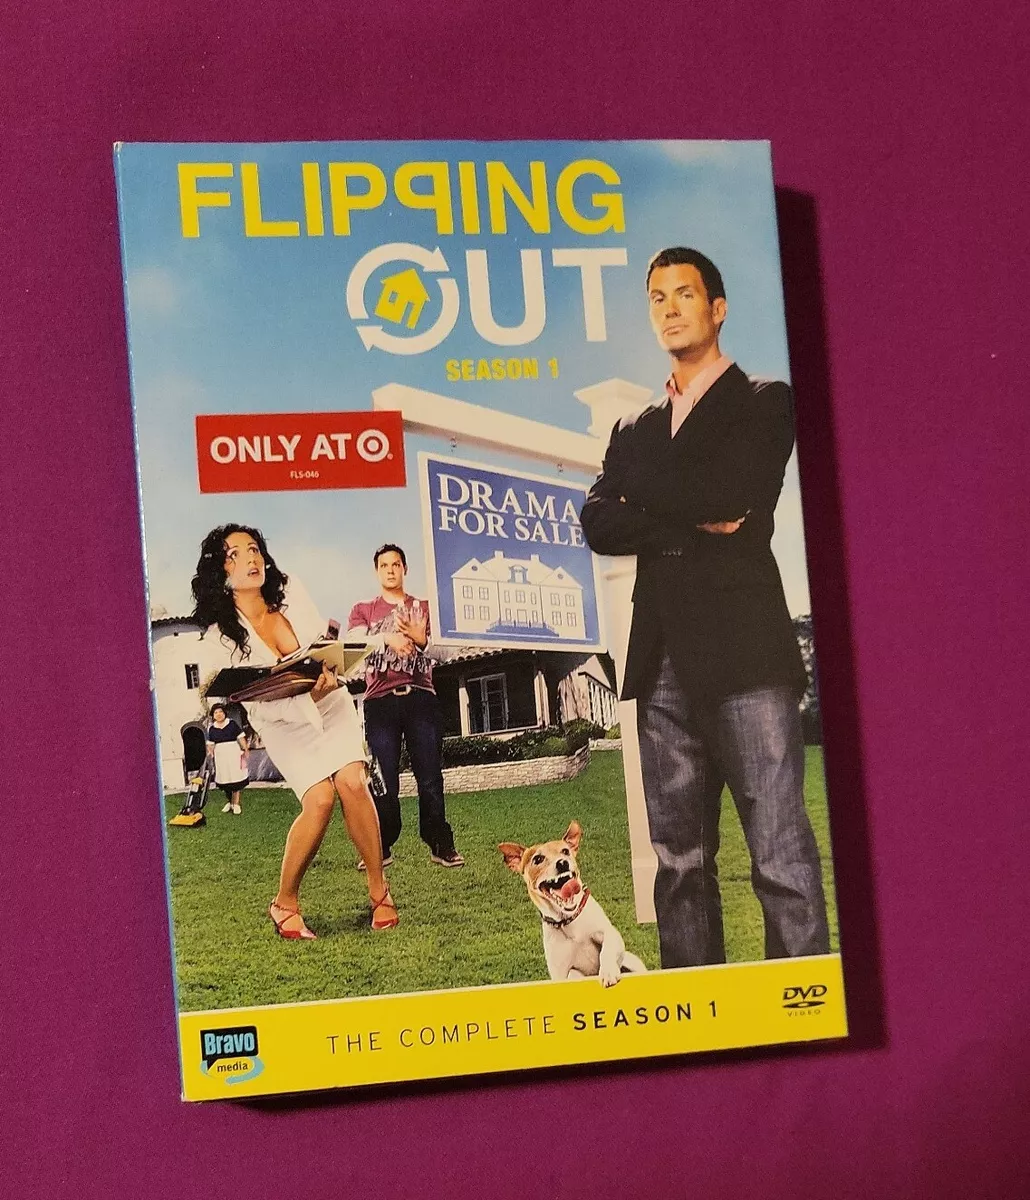 Flipping Out: Season 1 (DVD, 2010, 2-Disc Set with slipcover).